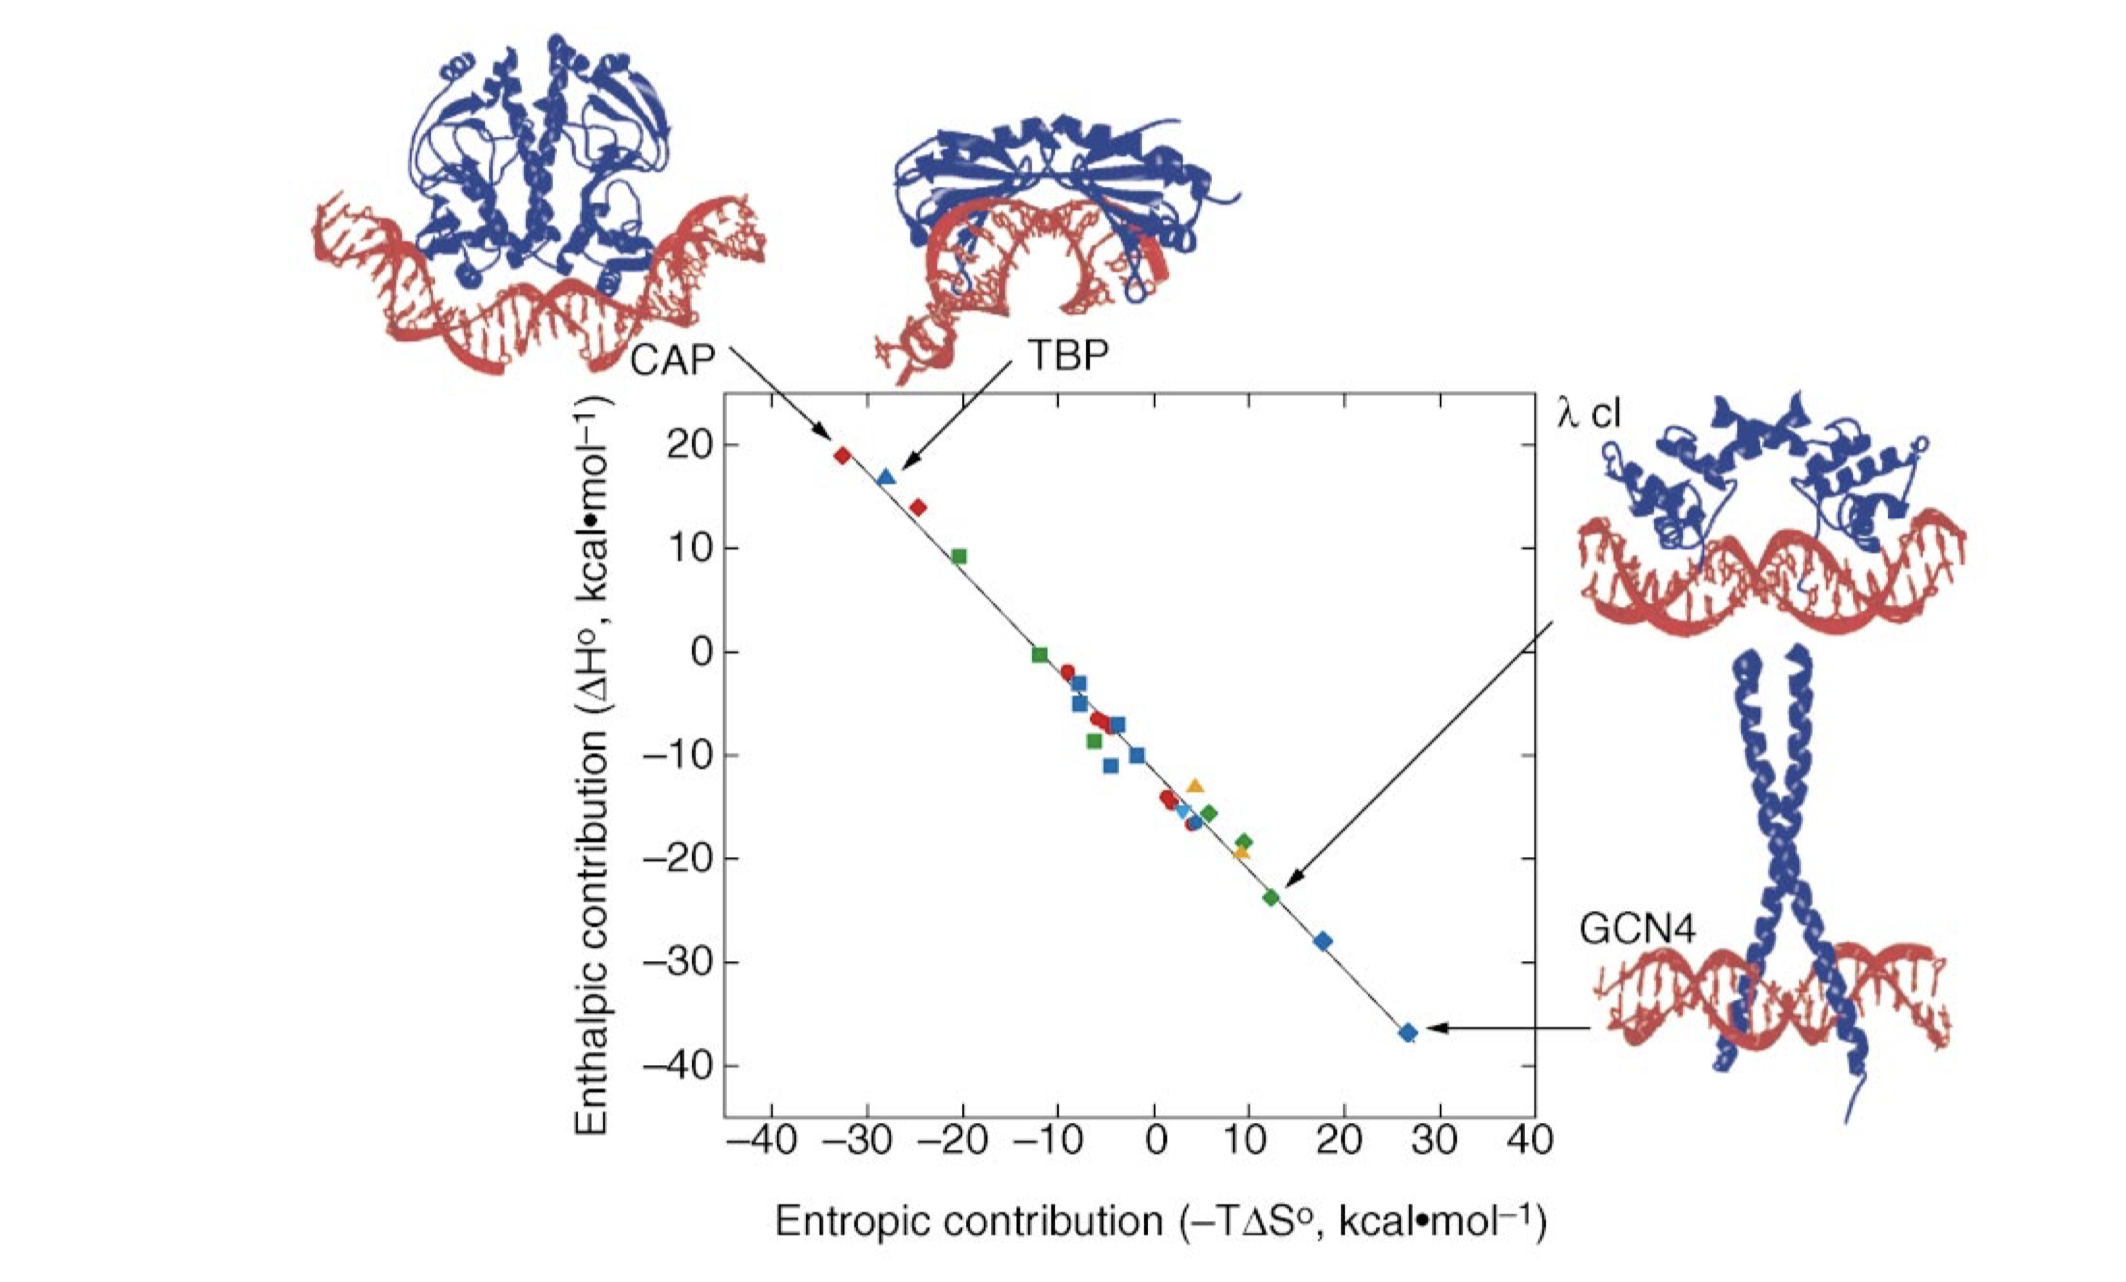 The relative enthalphic and entropic contributions to binding free energy (\(\Delta G_\text{free}\)) of a few site-specific DNA-binding proteins with similar \(\Delta G_\text{free}\) (about -11.7 kcal/mol). Taken from Jen-Jacobson, Engler, and Jacobson (2000)